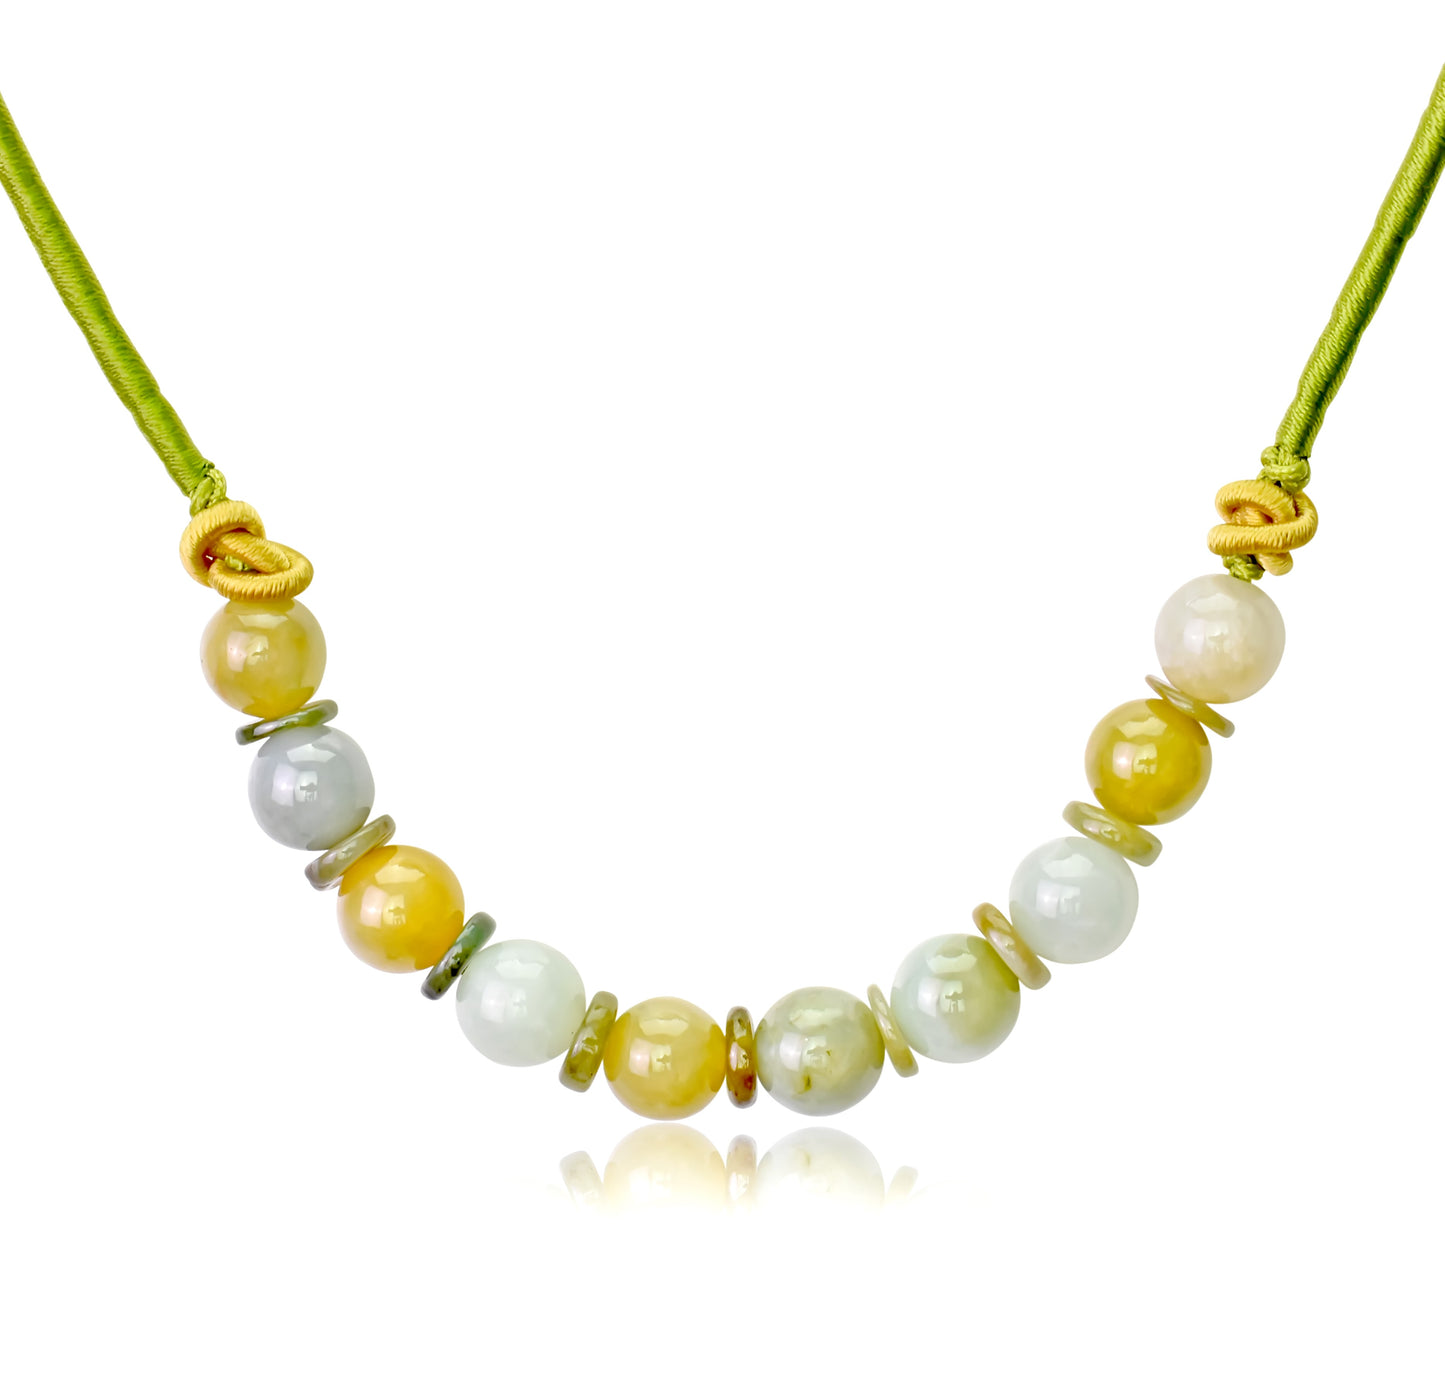 Get Closer to Nature with the PI Symbol and Jade Beads Necklace made with Lime Cord